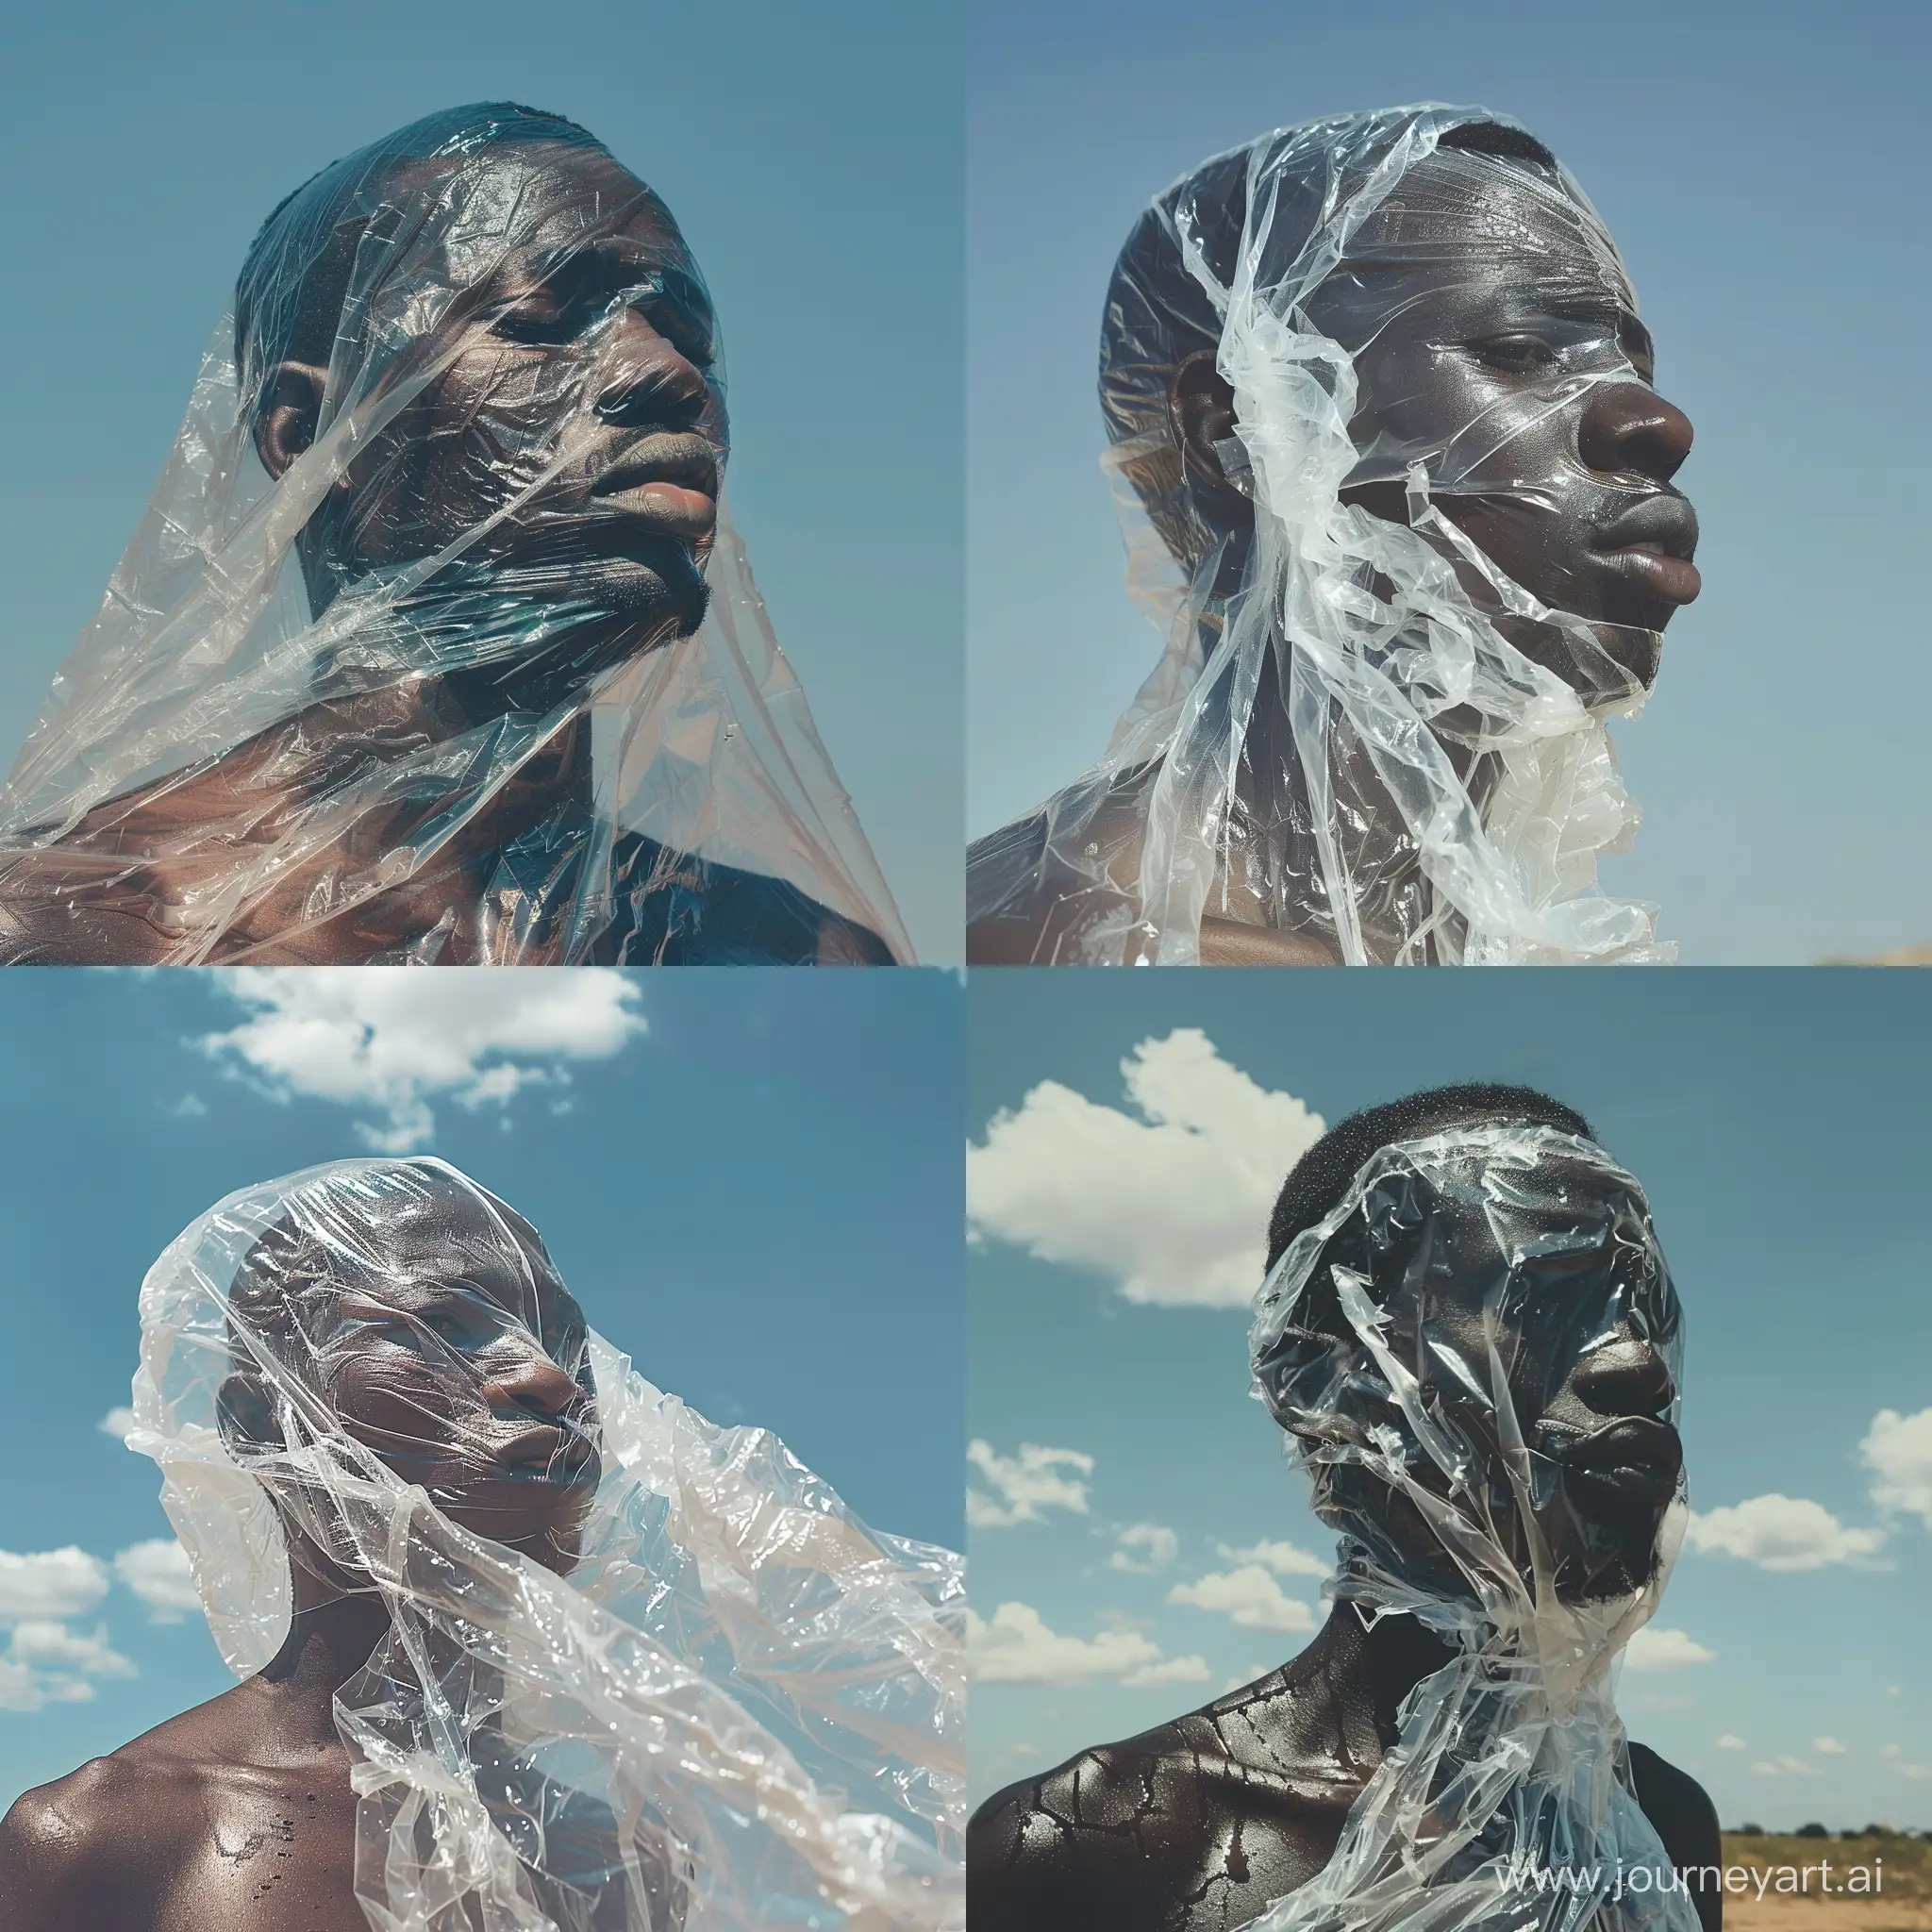 African man covered in 60% clear plastic bag on a sunny day 